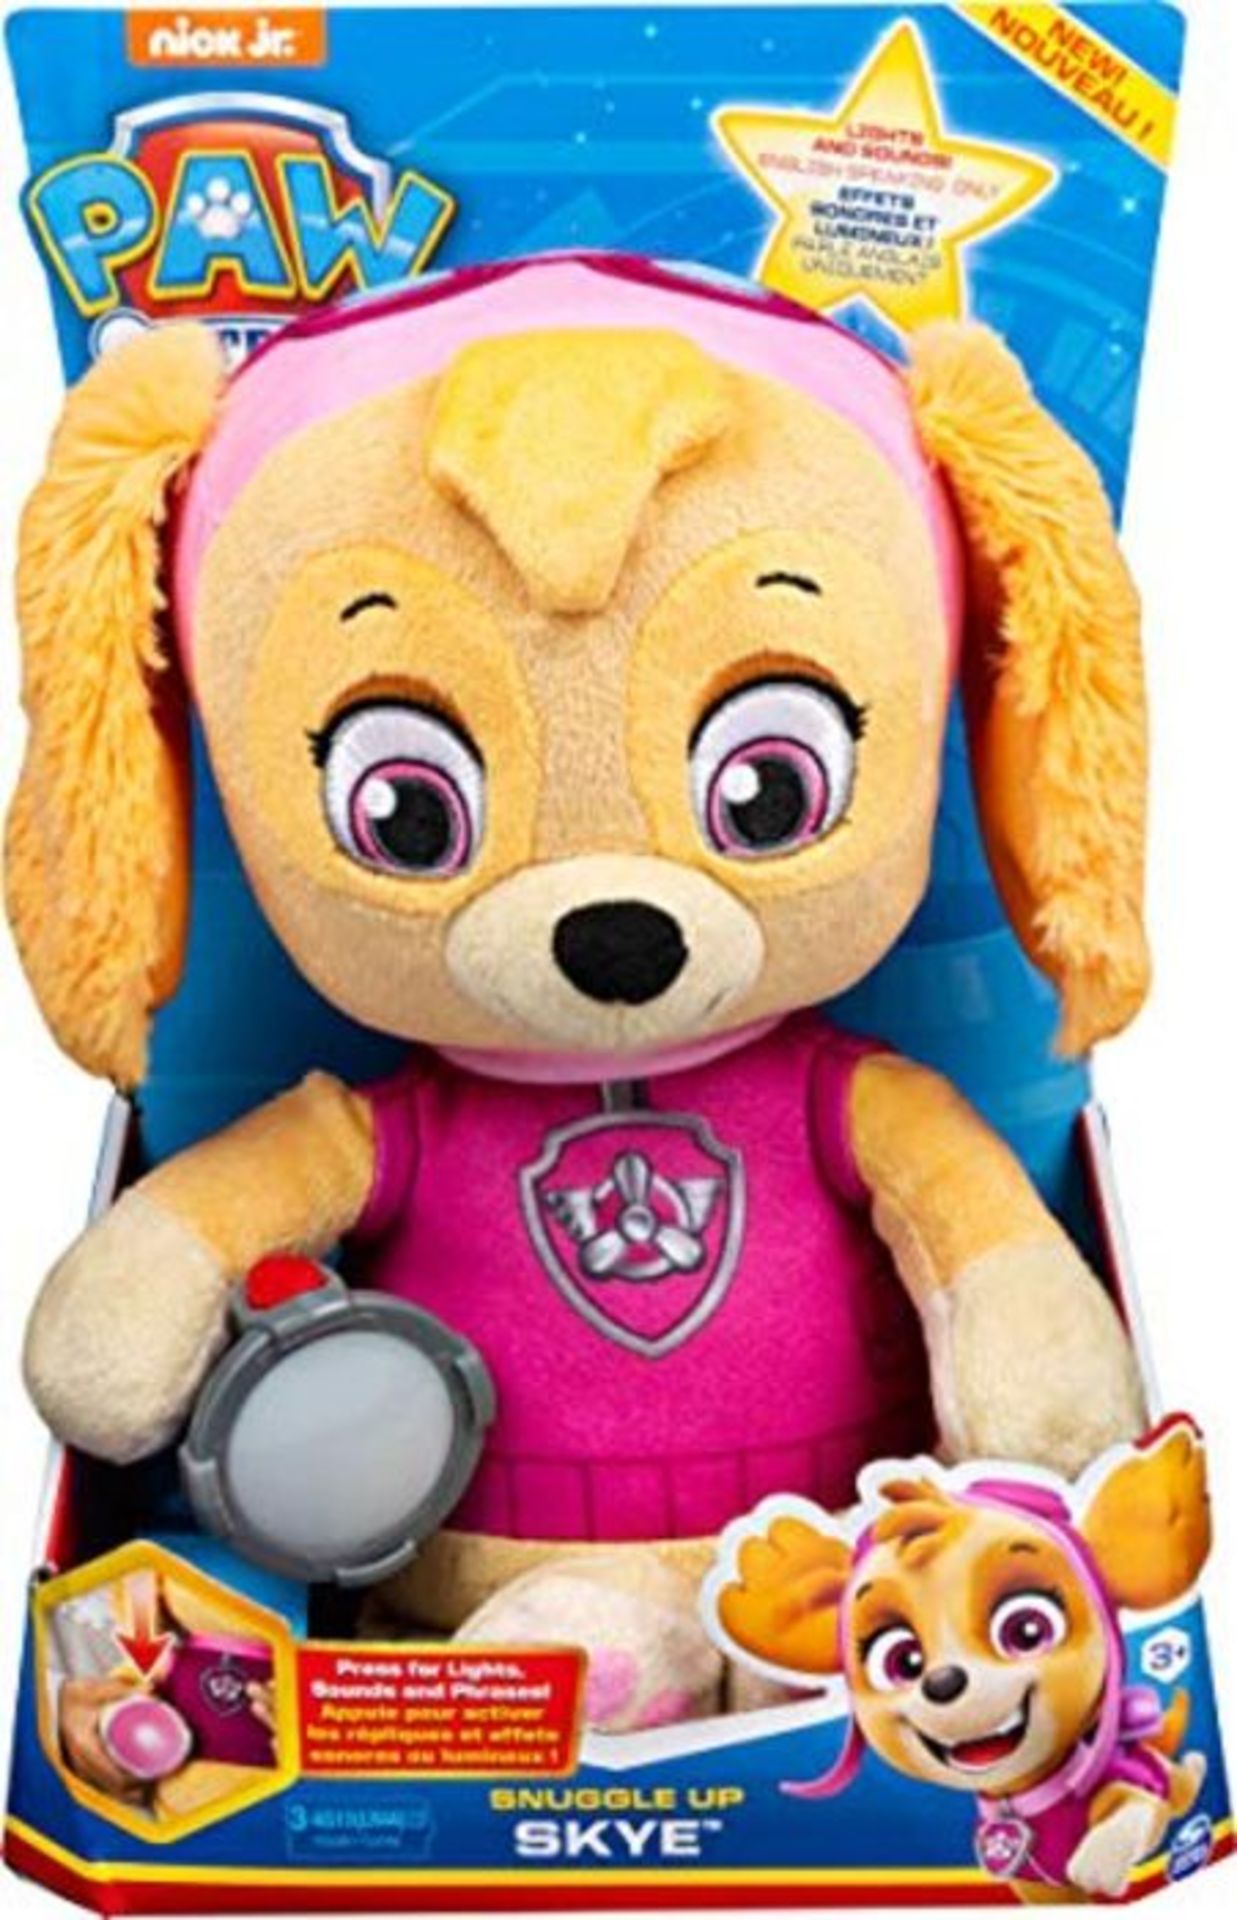 PAW Patrol Snuggle Up Skye Plush with Torch and Sounds, for Kids Aged 3 Years and Over